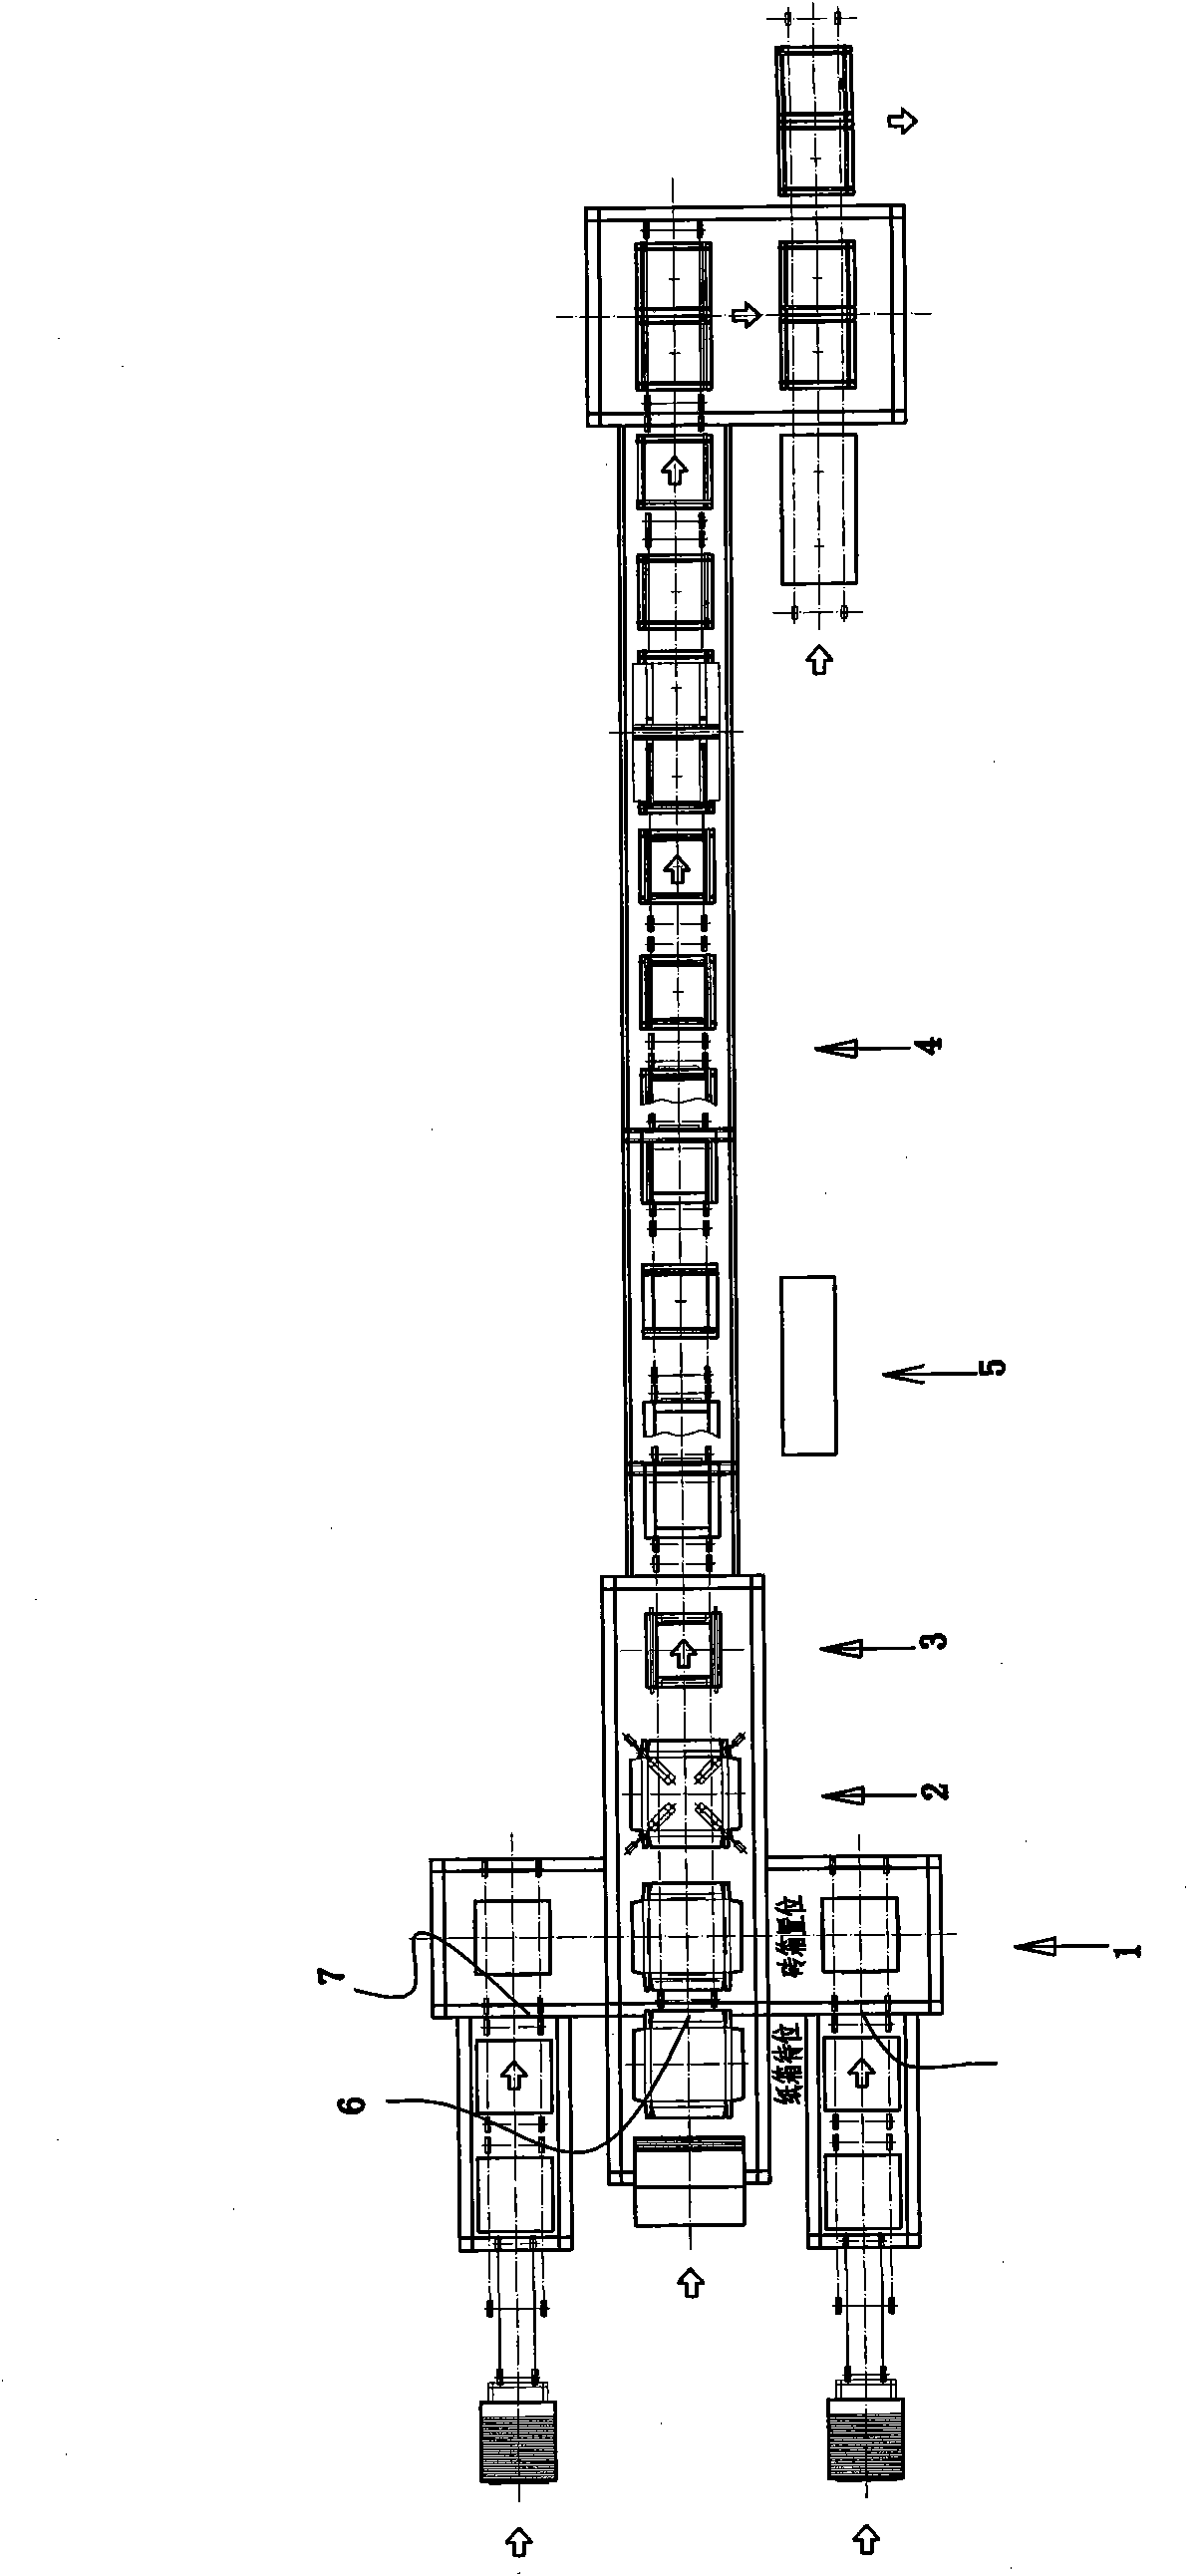 Tile-packaging method and apparatus